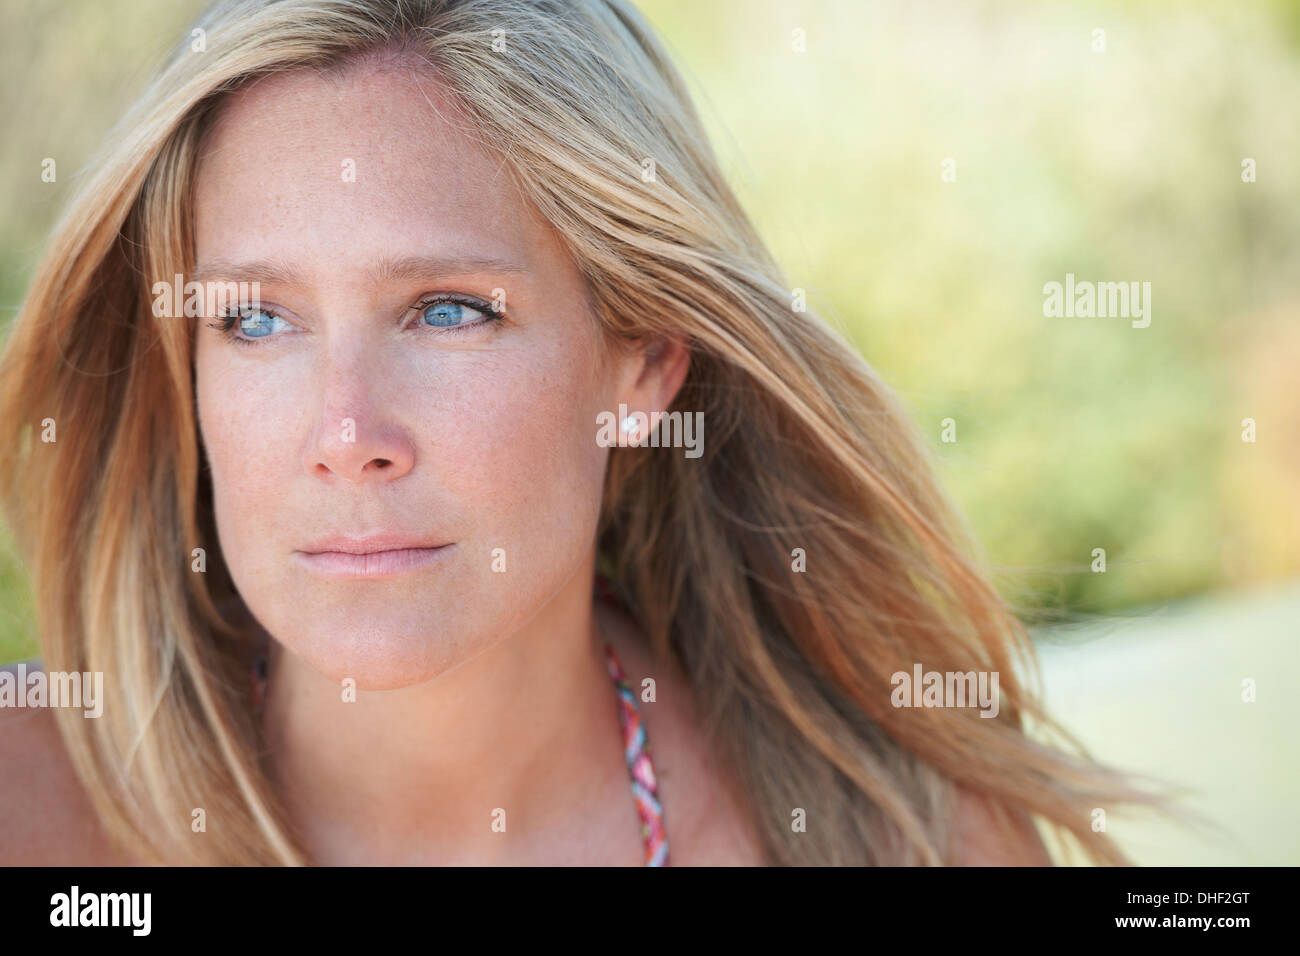 Portrait of mature woman with blonde hair, looking away Stock Photo